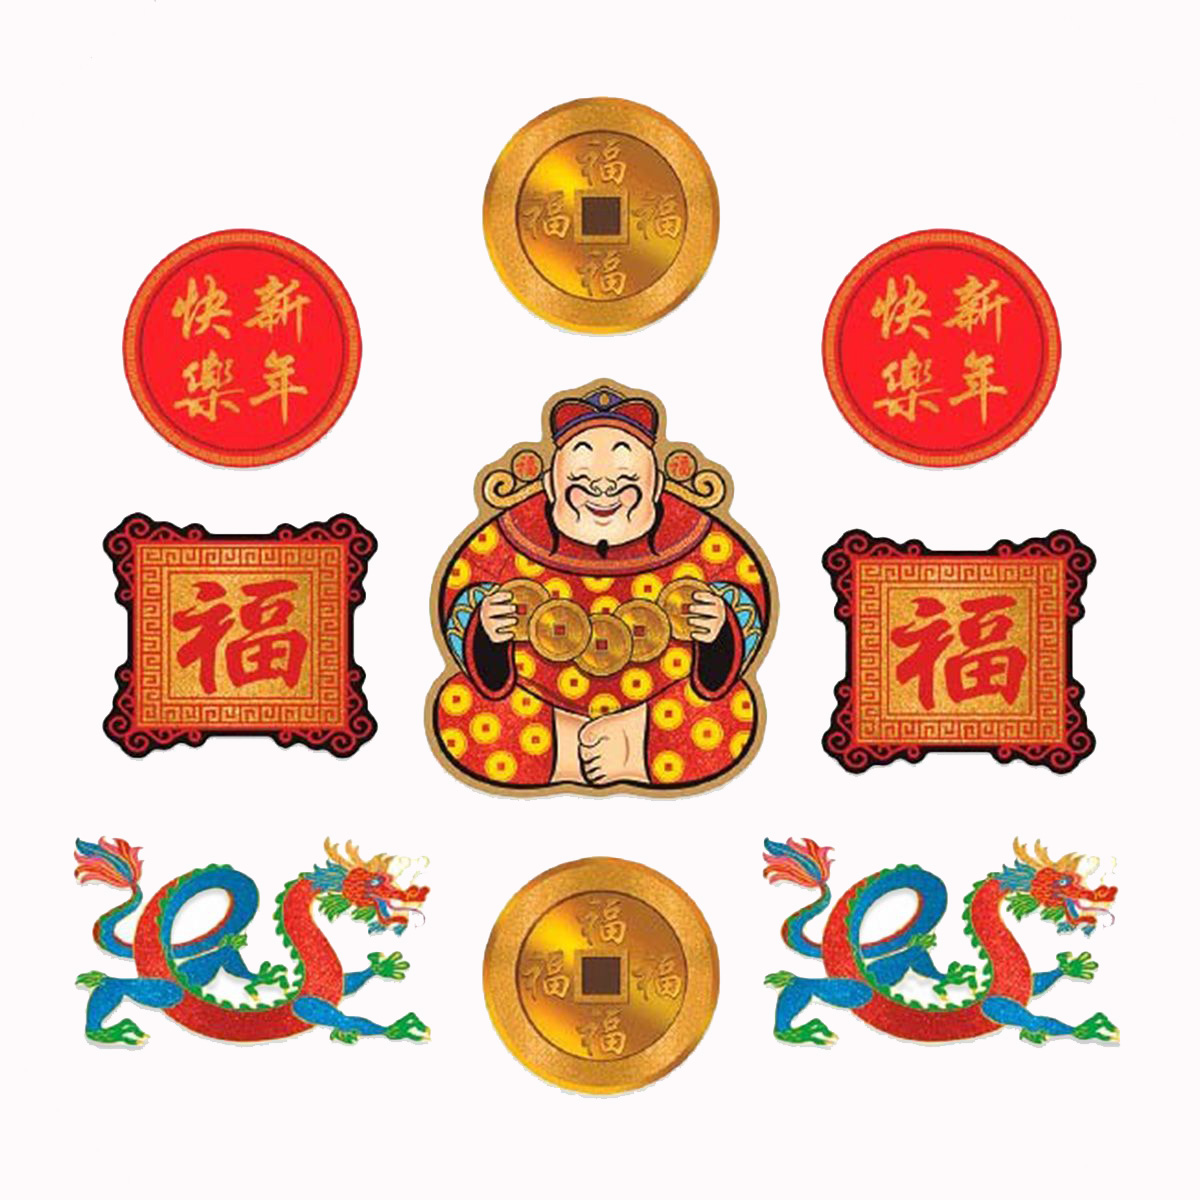 CHINESE NEW YEAR CUT OUTS - PACK OF 9